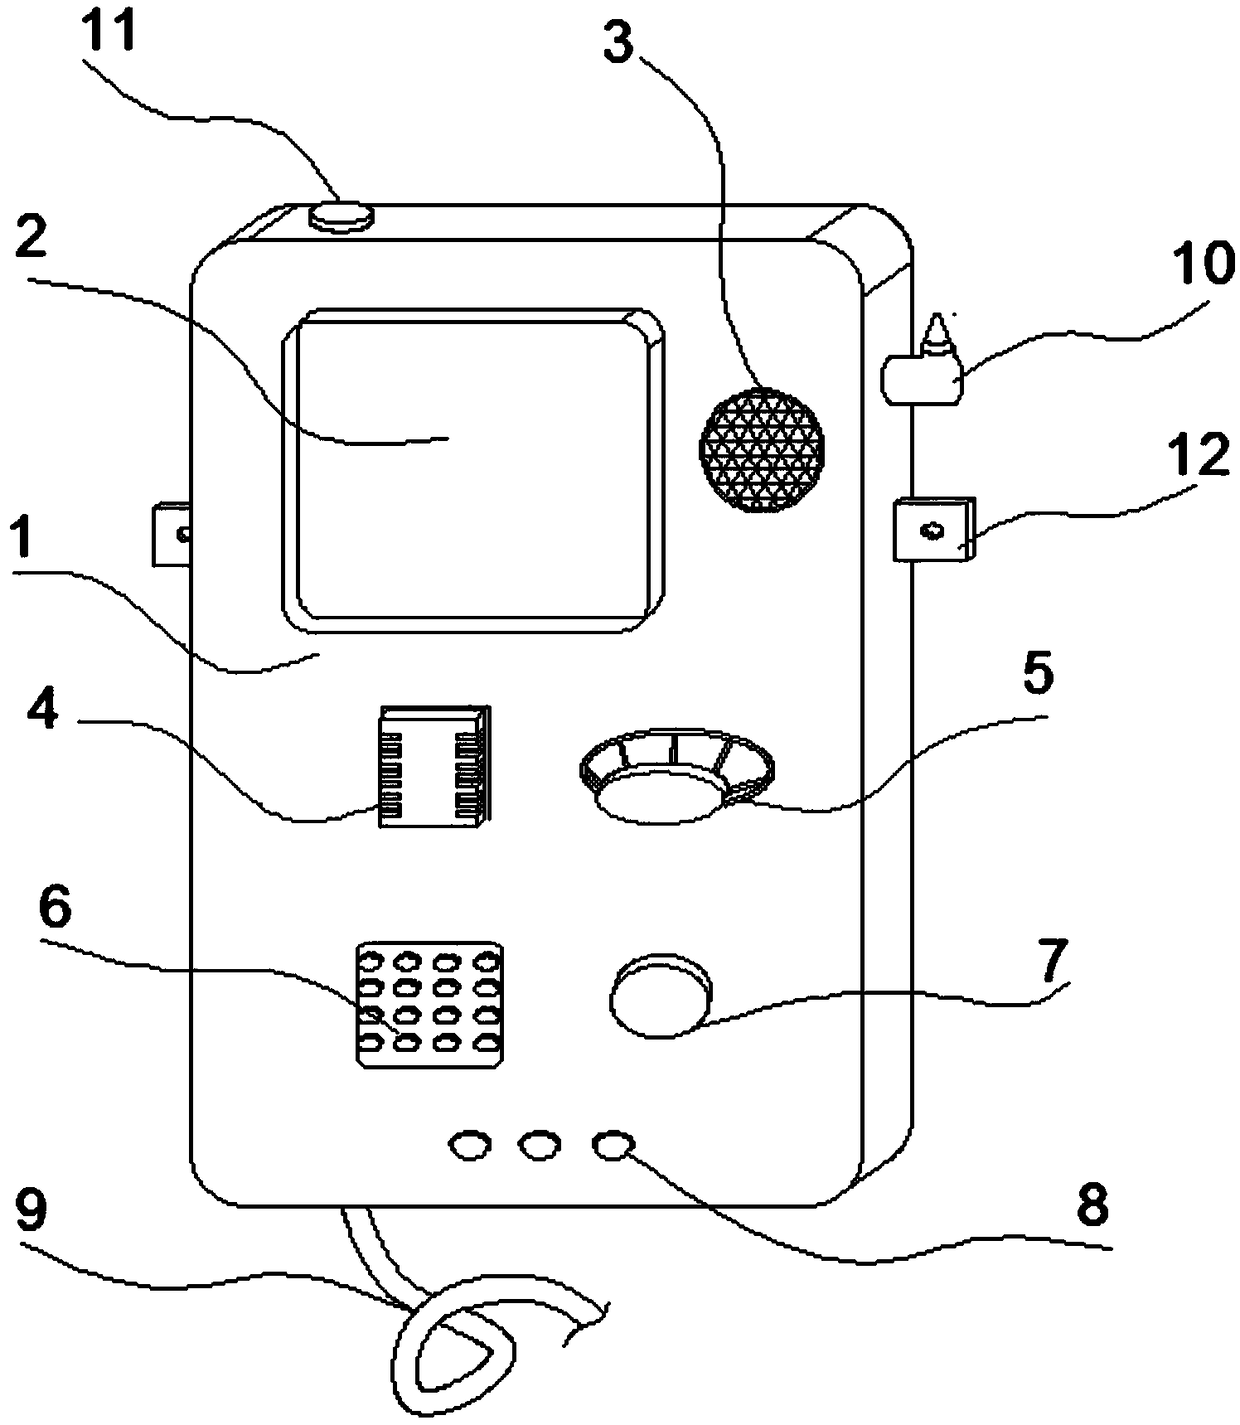 Kitchen monitoring and alarming device and method